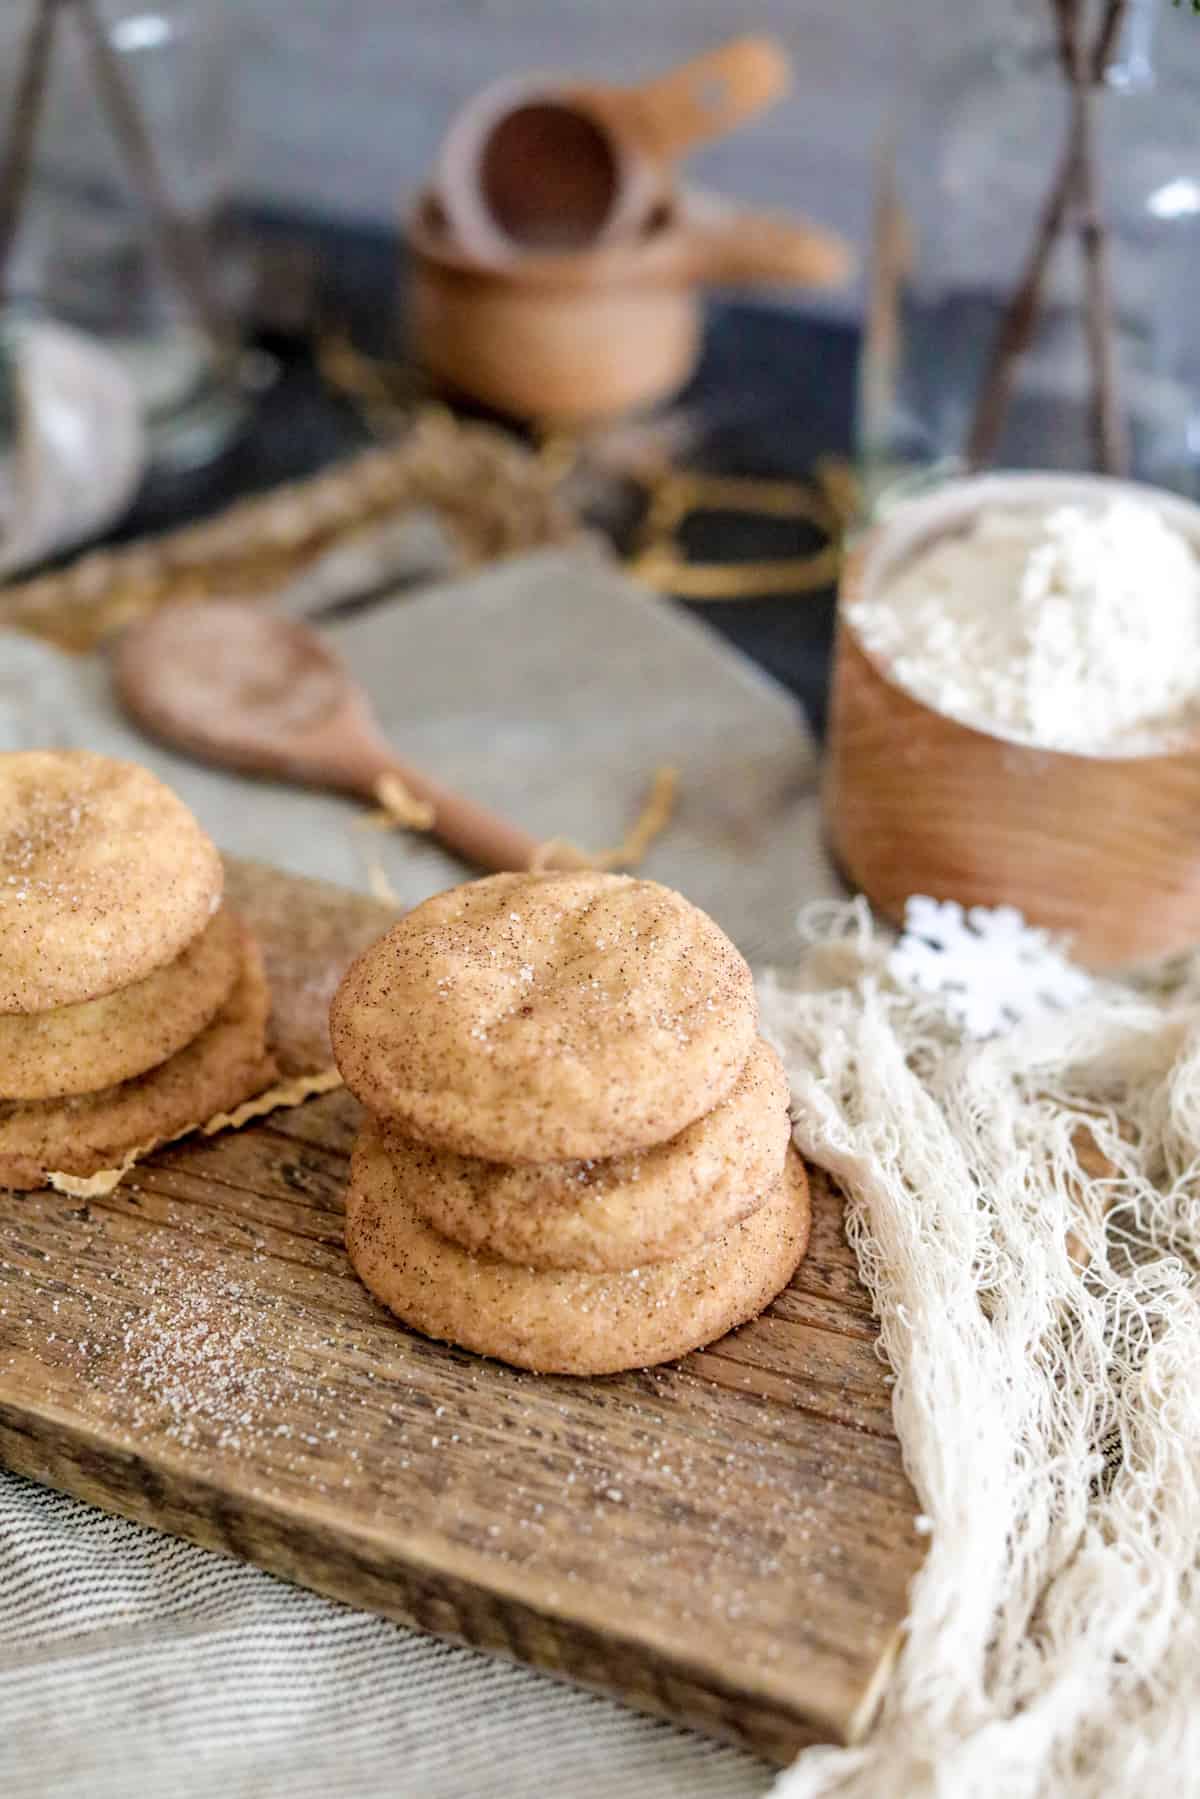 Snickerdoodle cookies on a wood board with white netting, flour, and spoon.